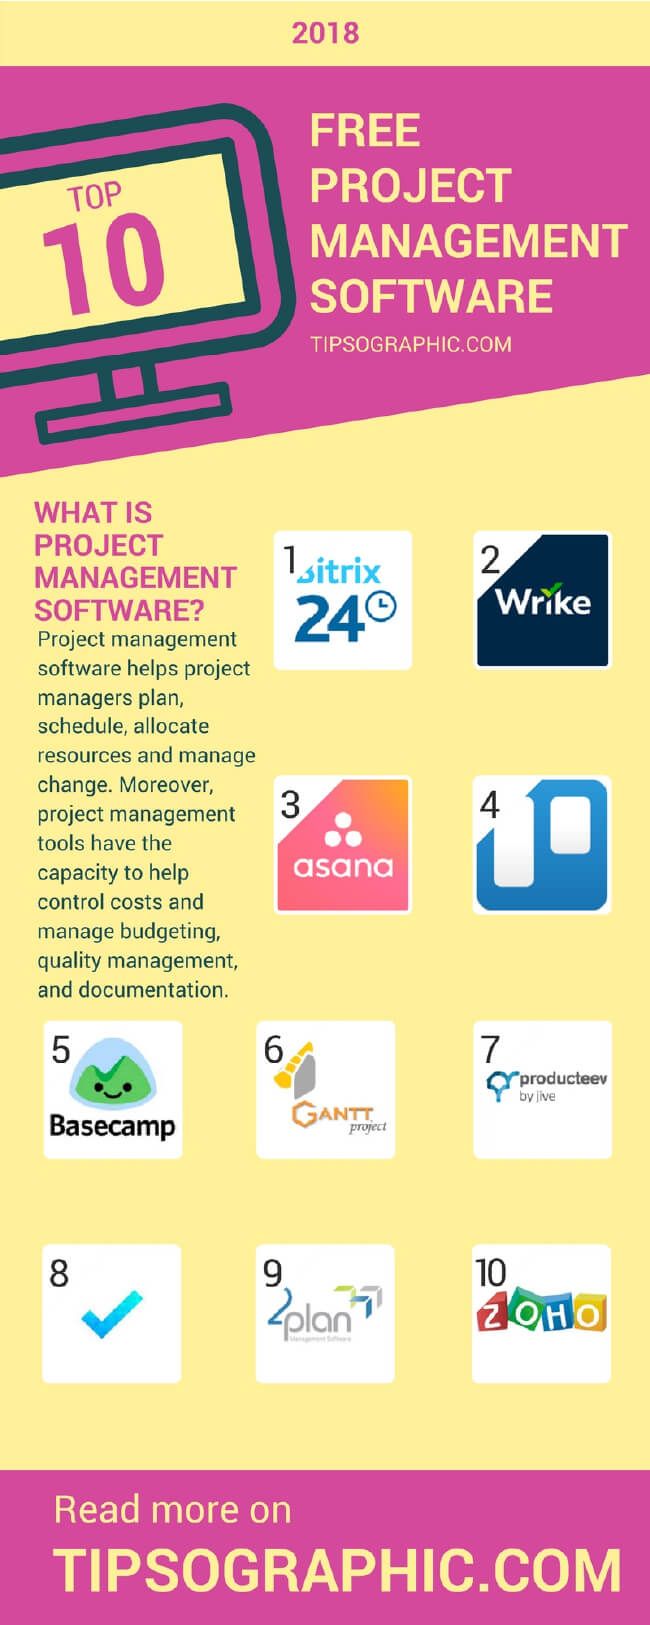 Image titled free project management software 2018 best systems